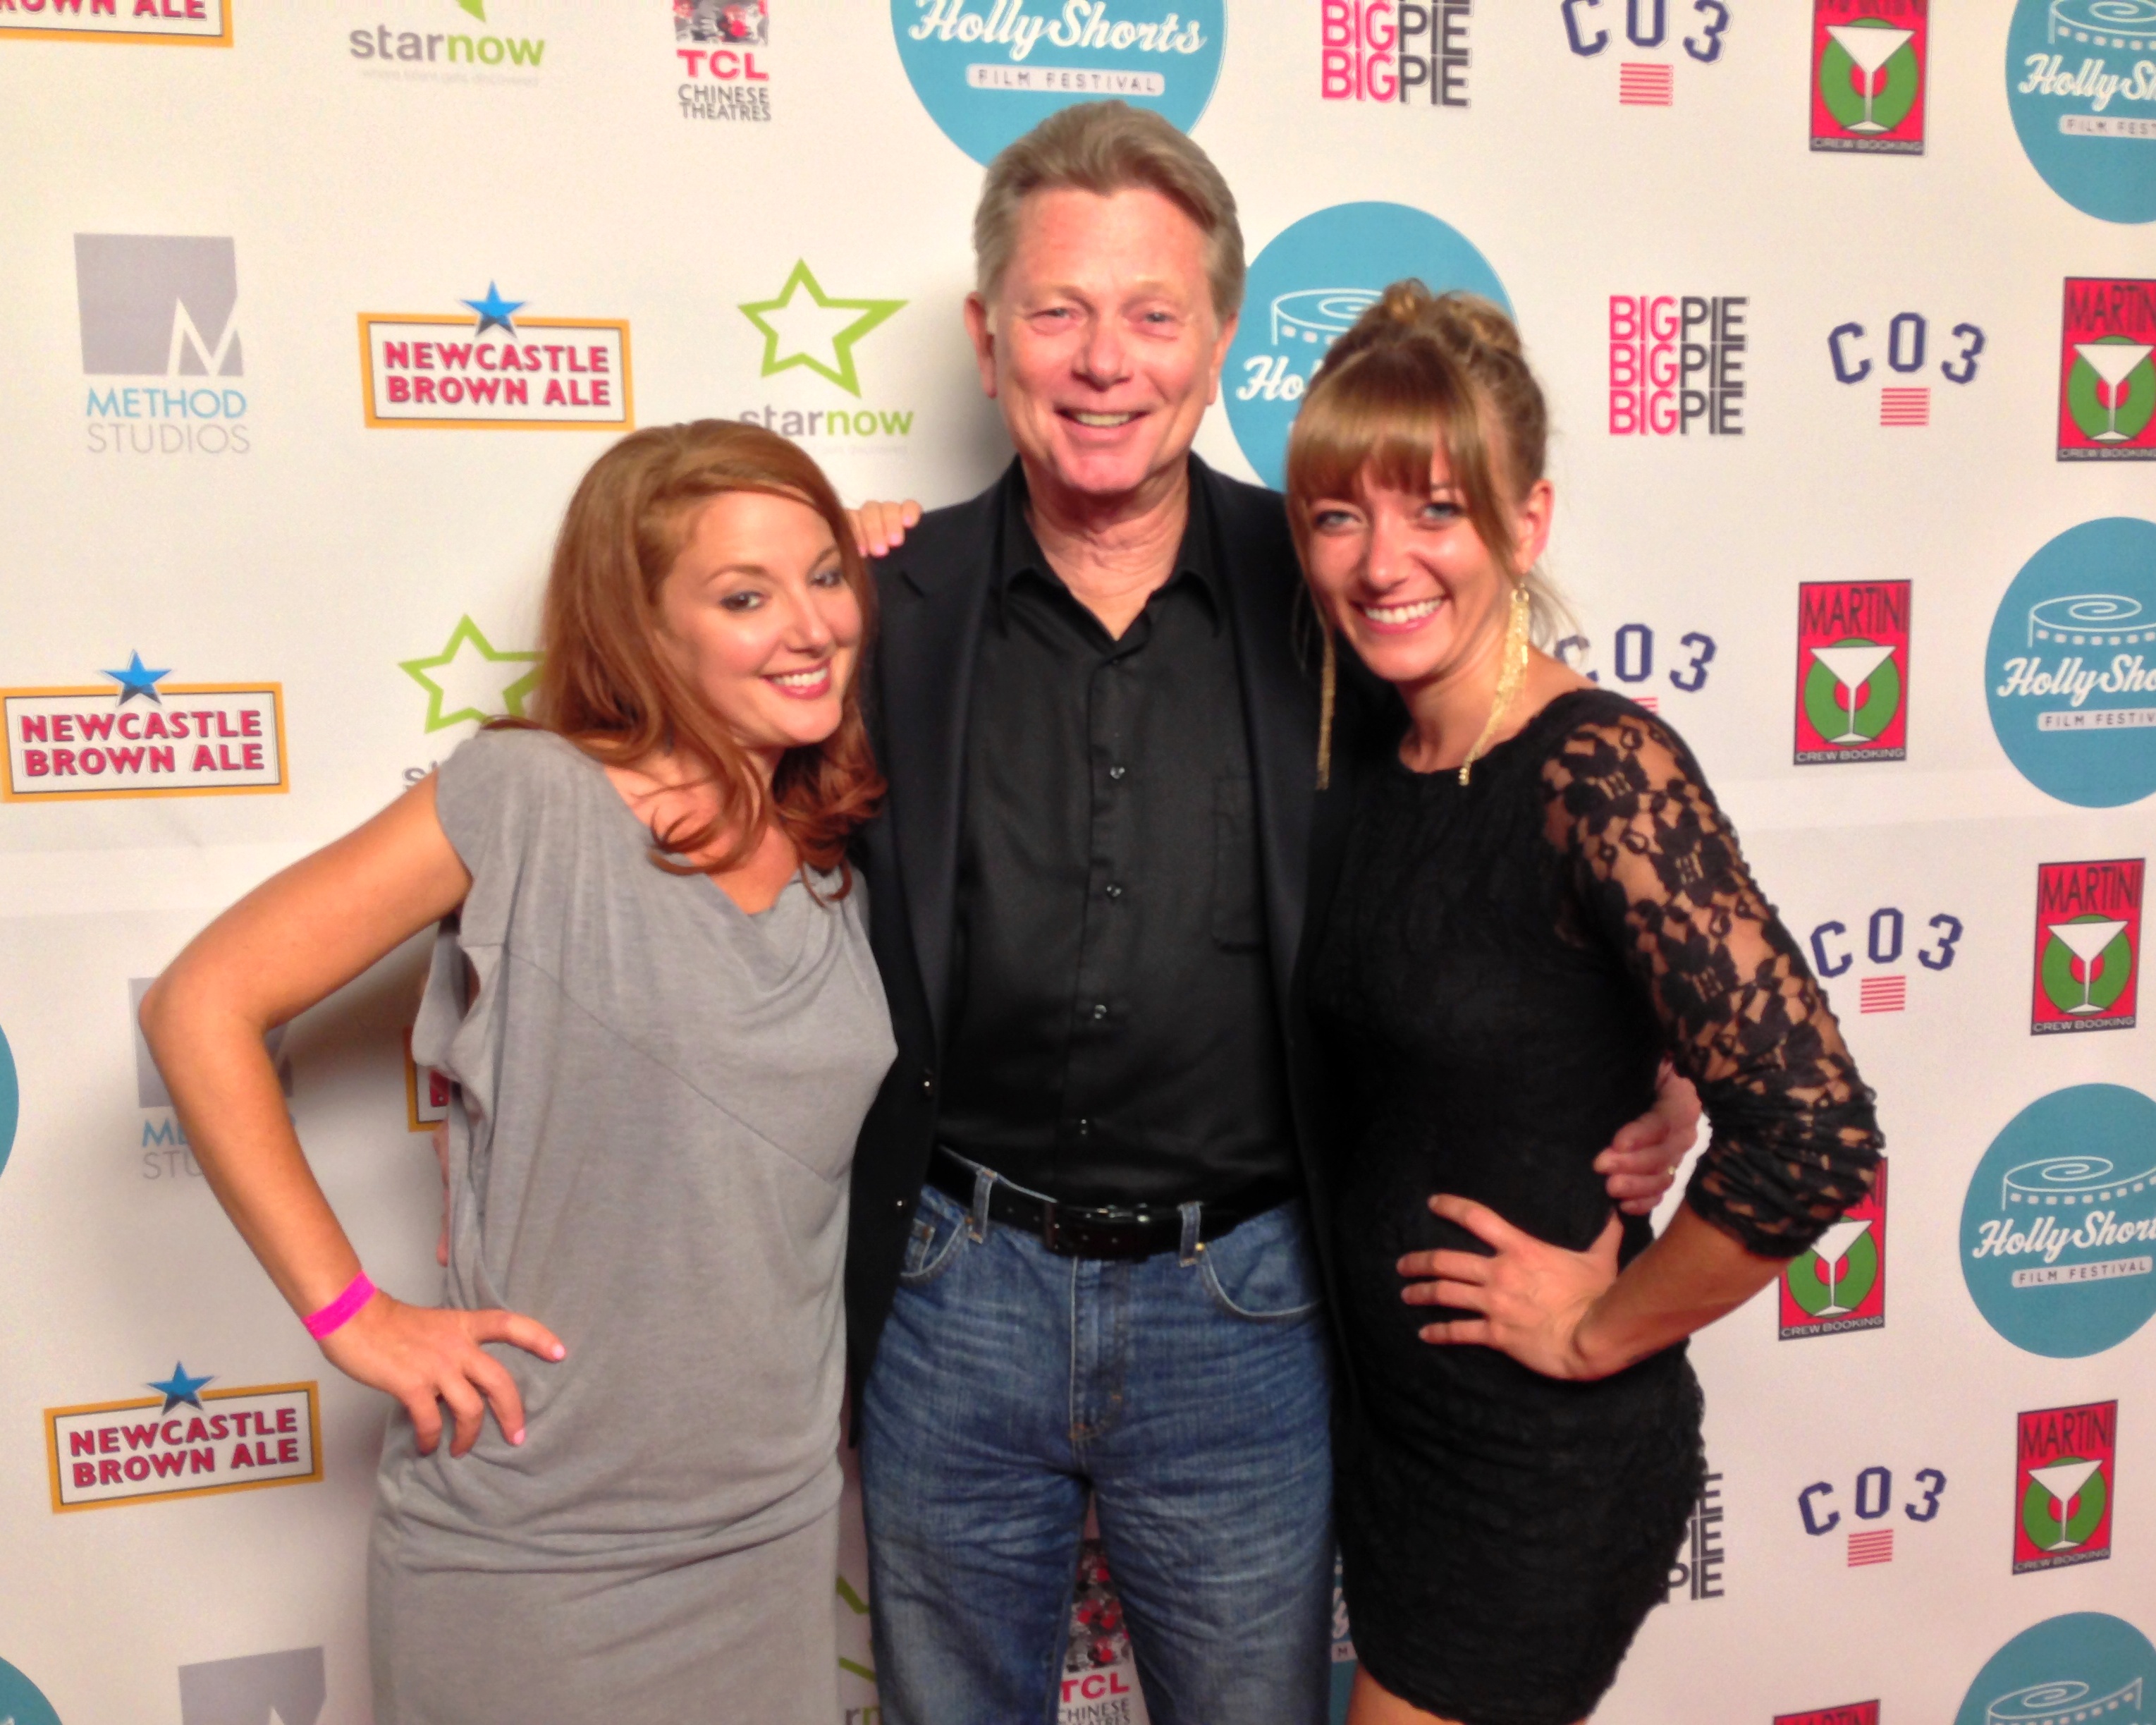 Timothy Guest with Kali Cook (left) and Colleen Boag (right) at the 2013 Holly Shorts Film Festival.